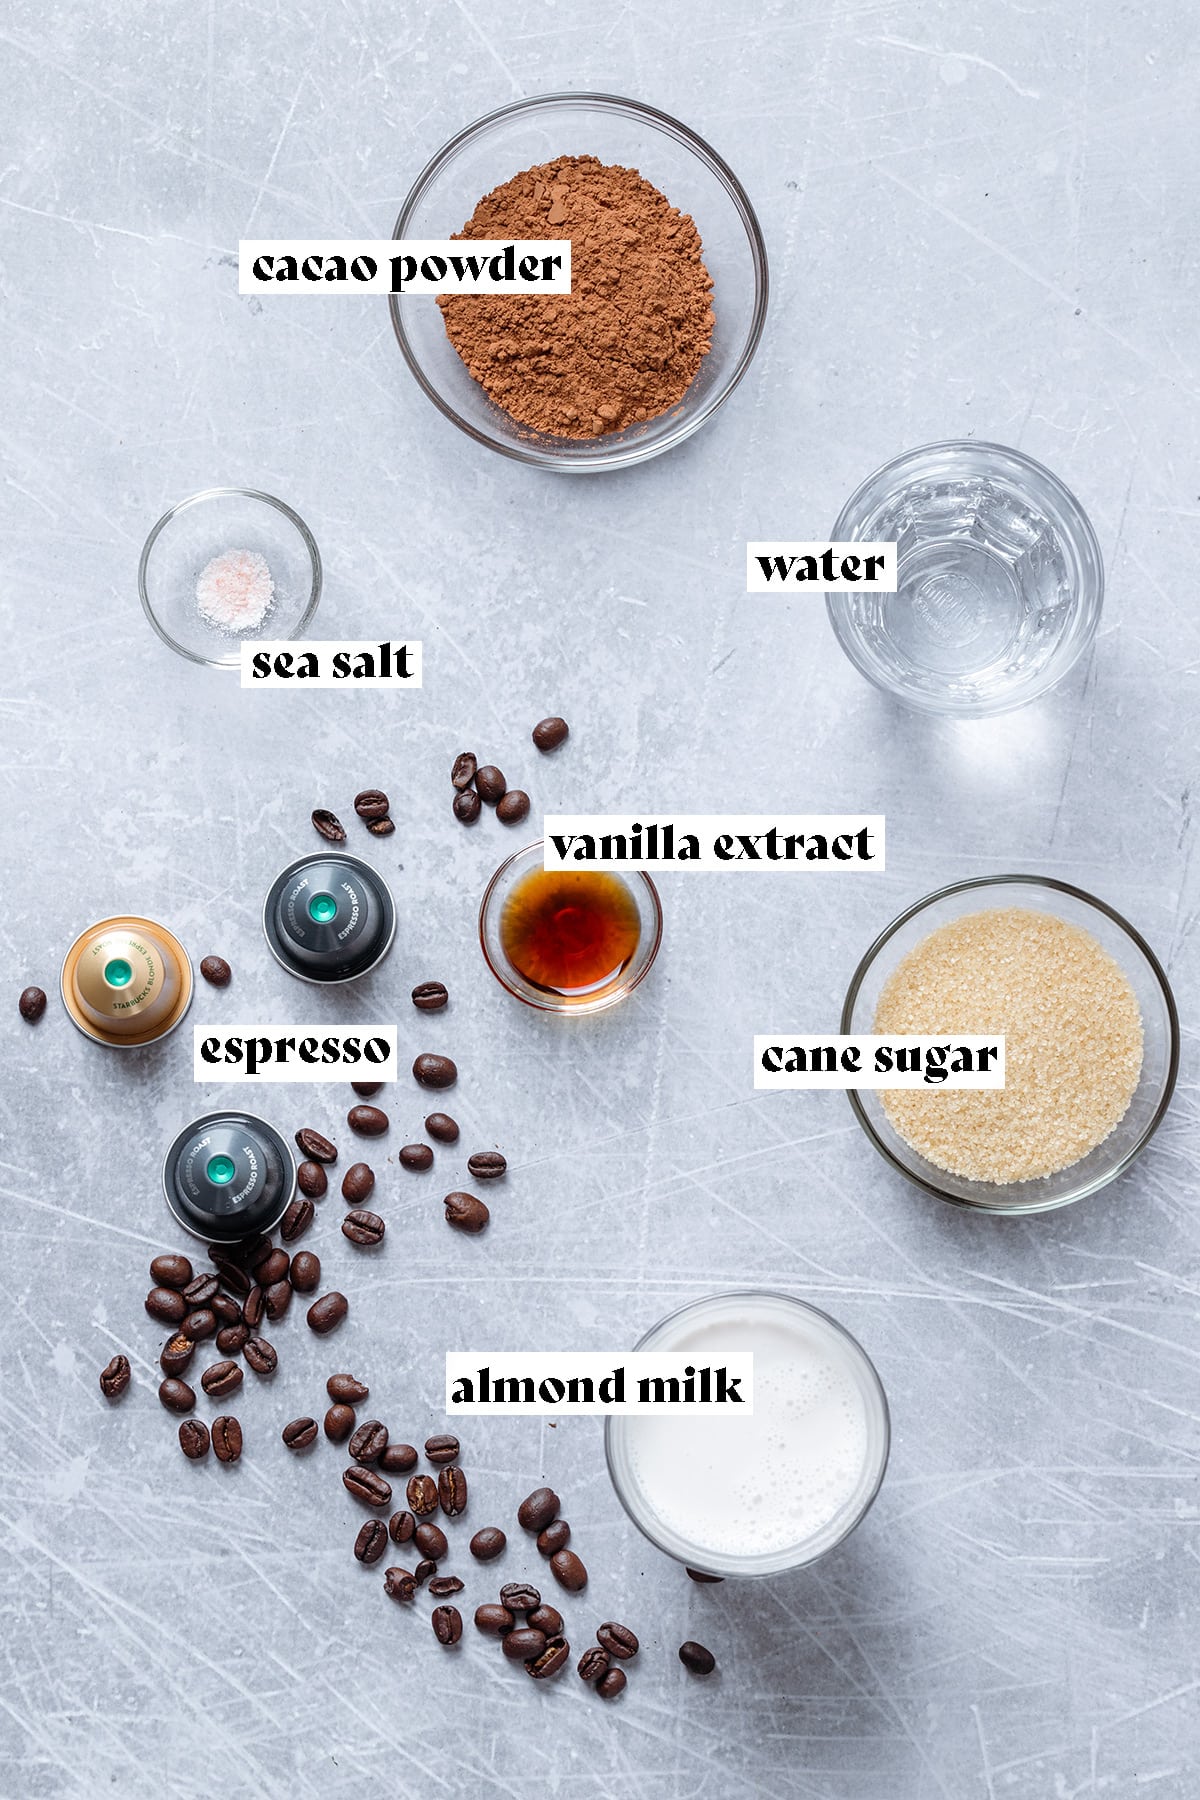 Ingredients for Iced Chocolate Shaken Espresso like coffee, cacao, and sugar all laid out.